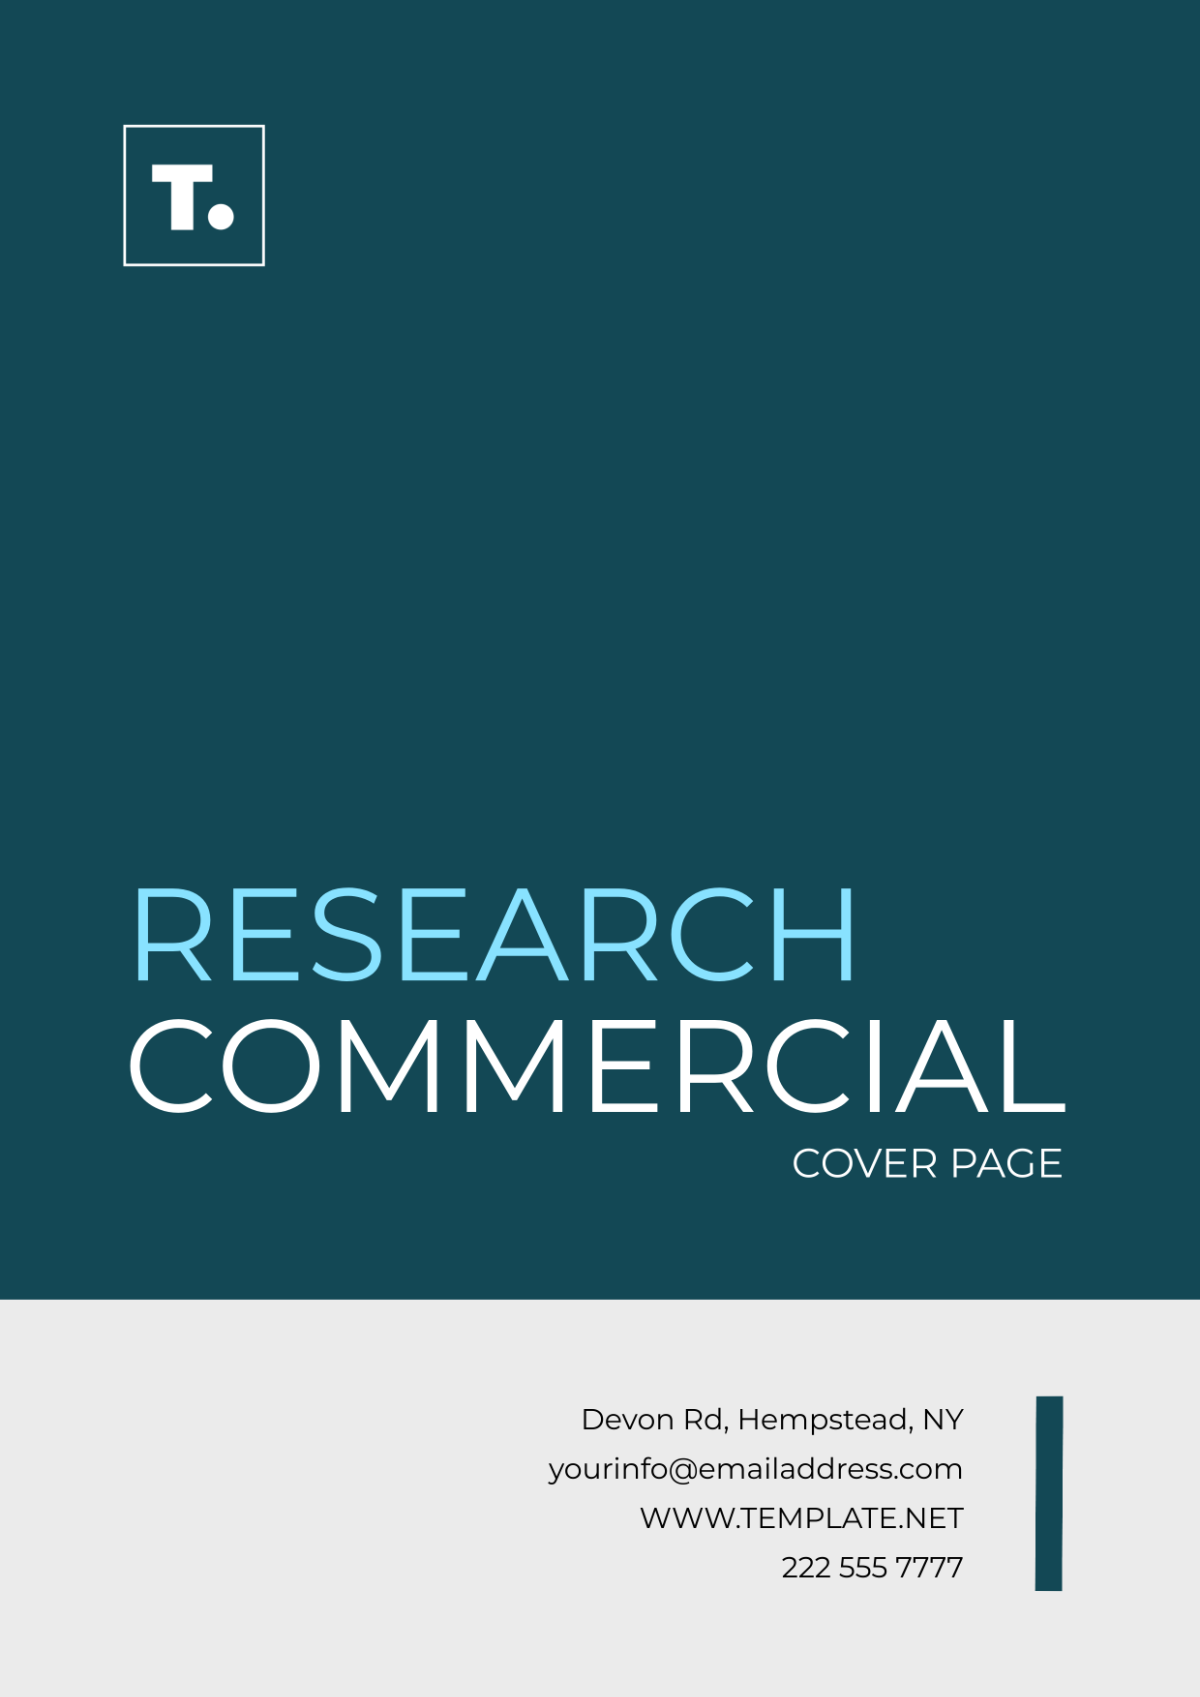 Research Commercial Cover Page